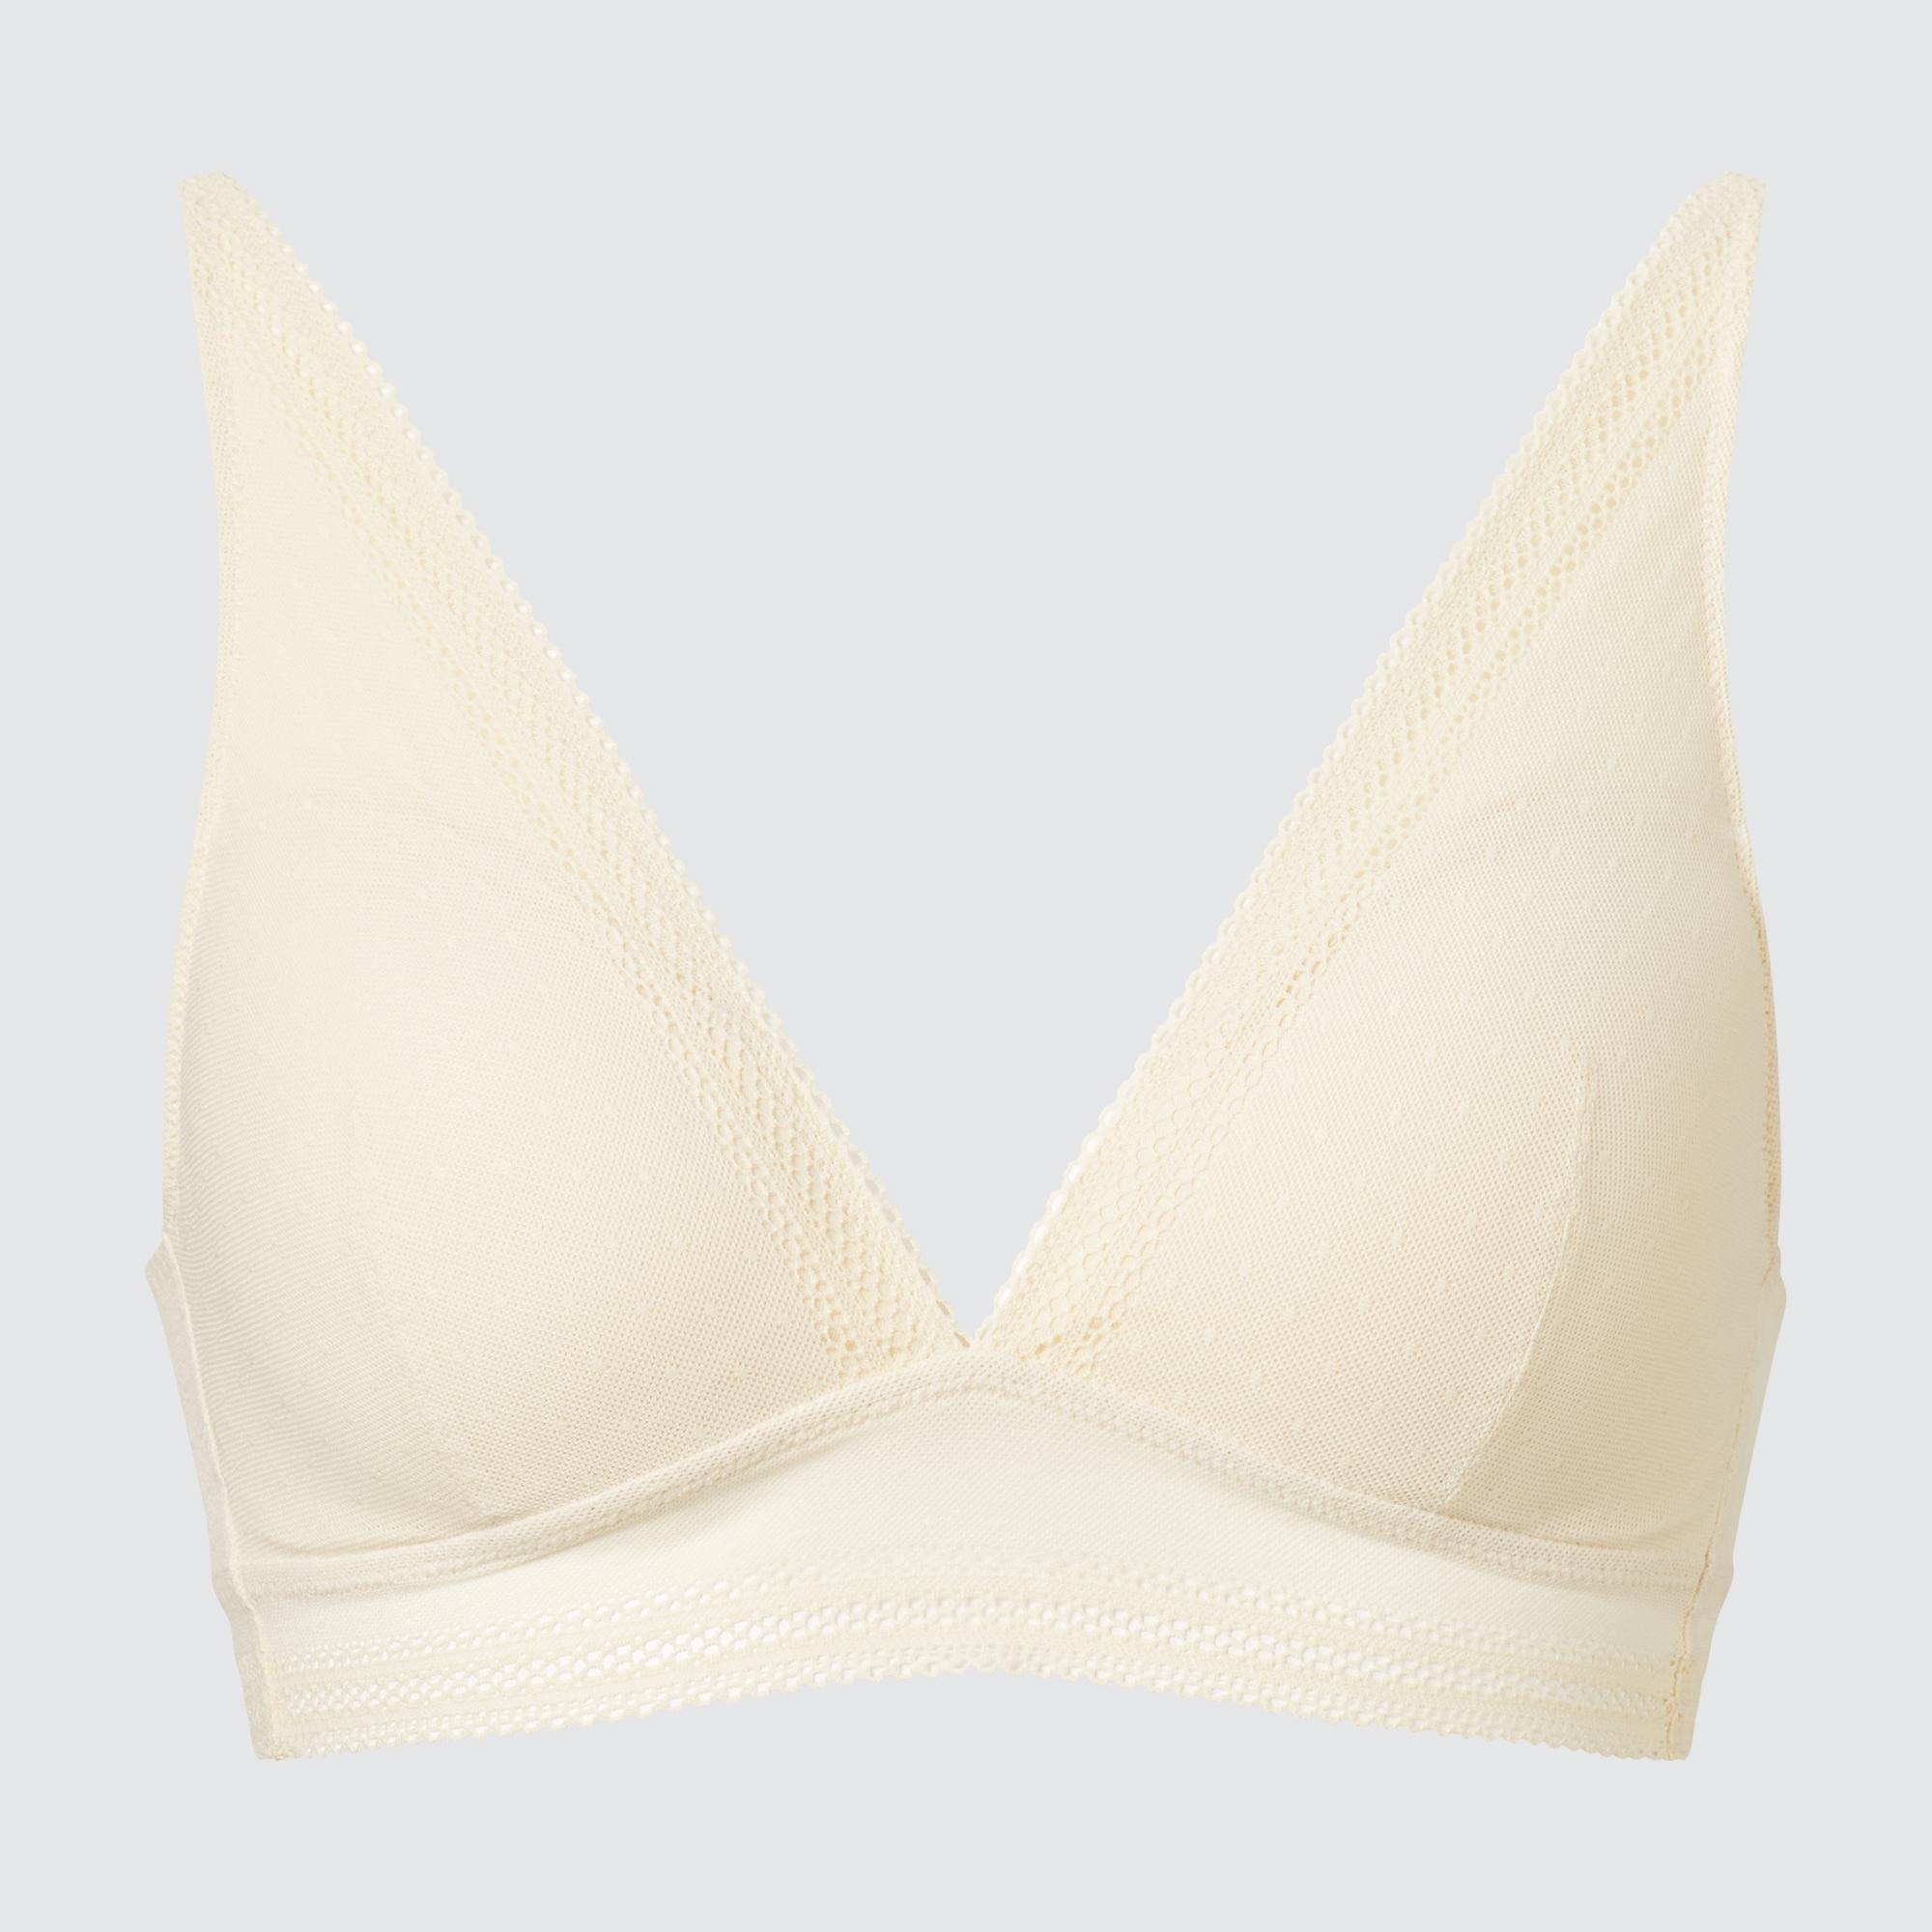 Wireless Bra (Plunging Relax, Lace)